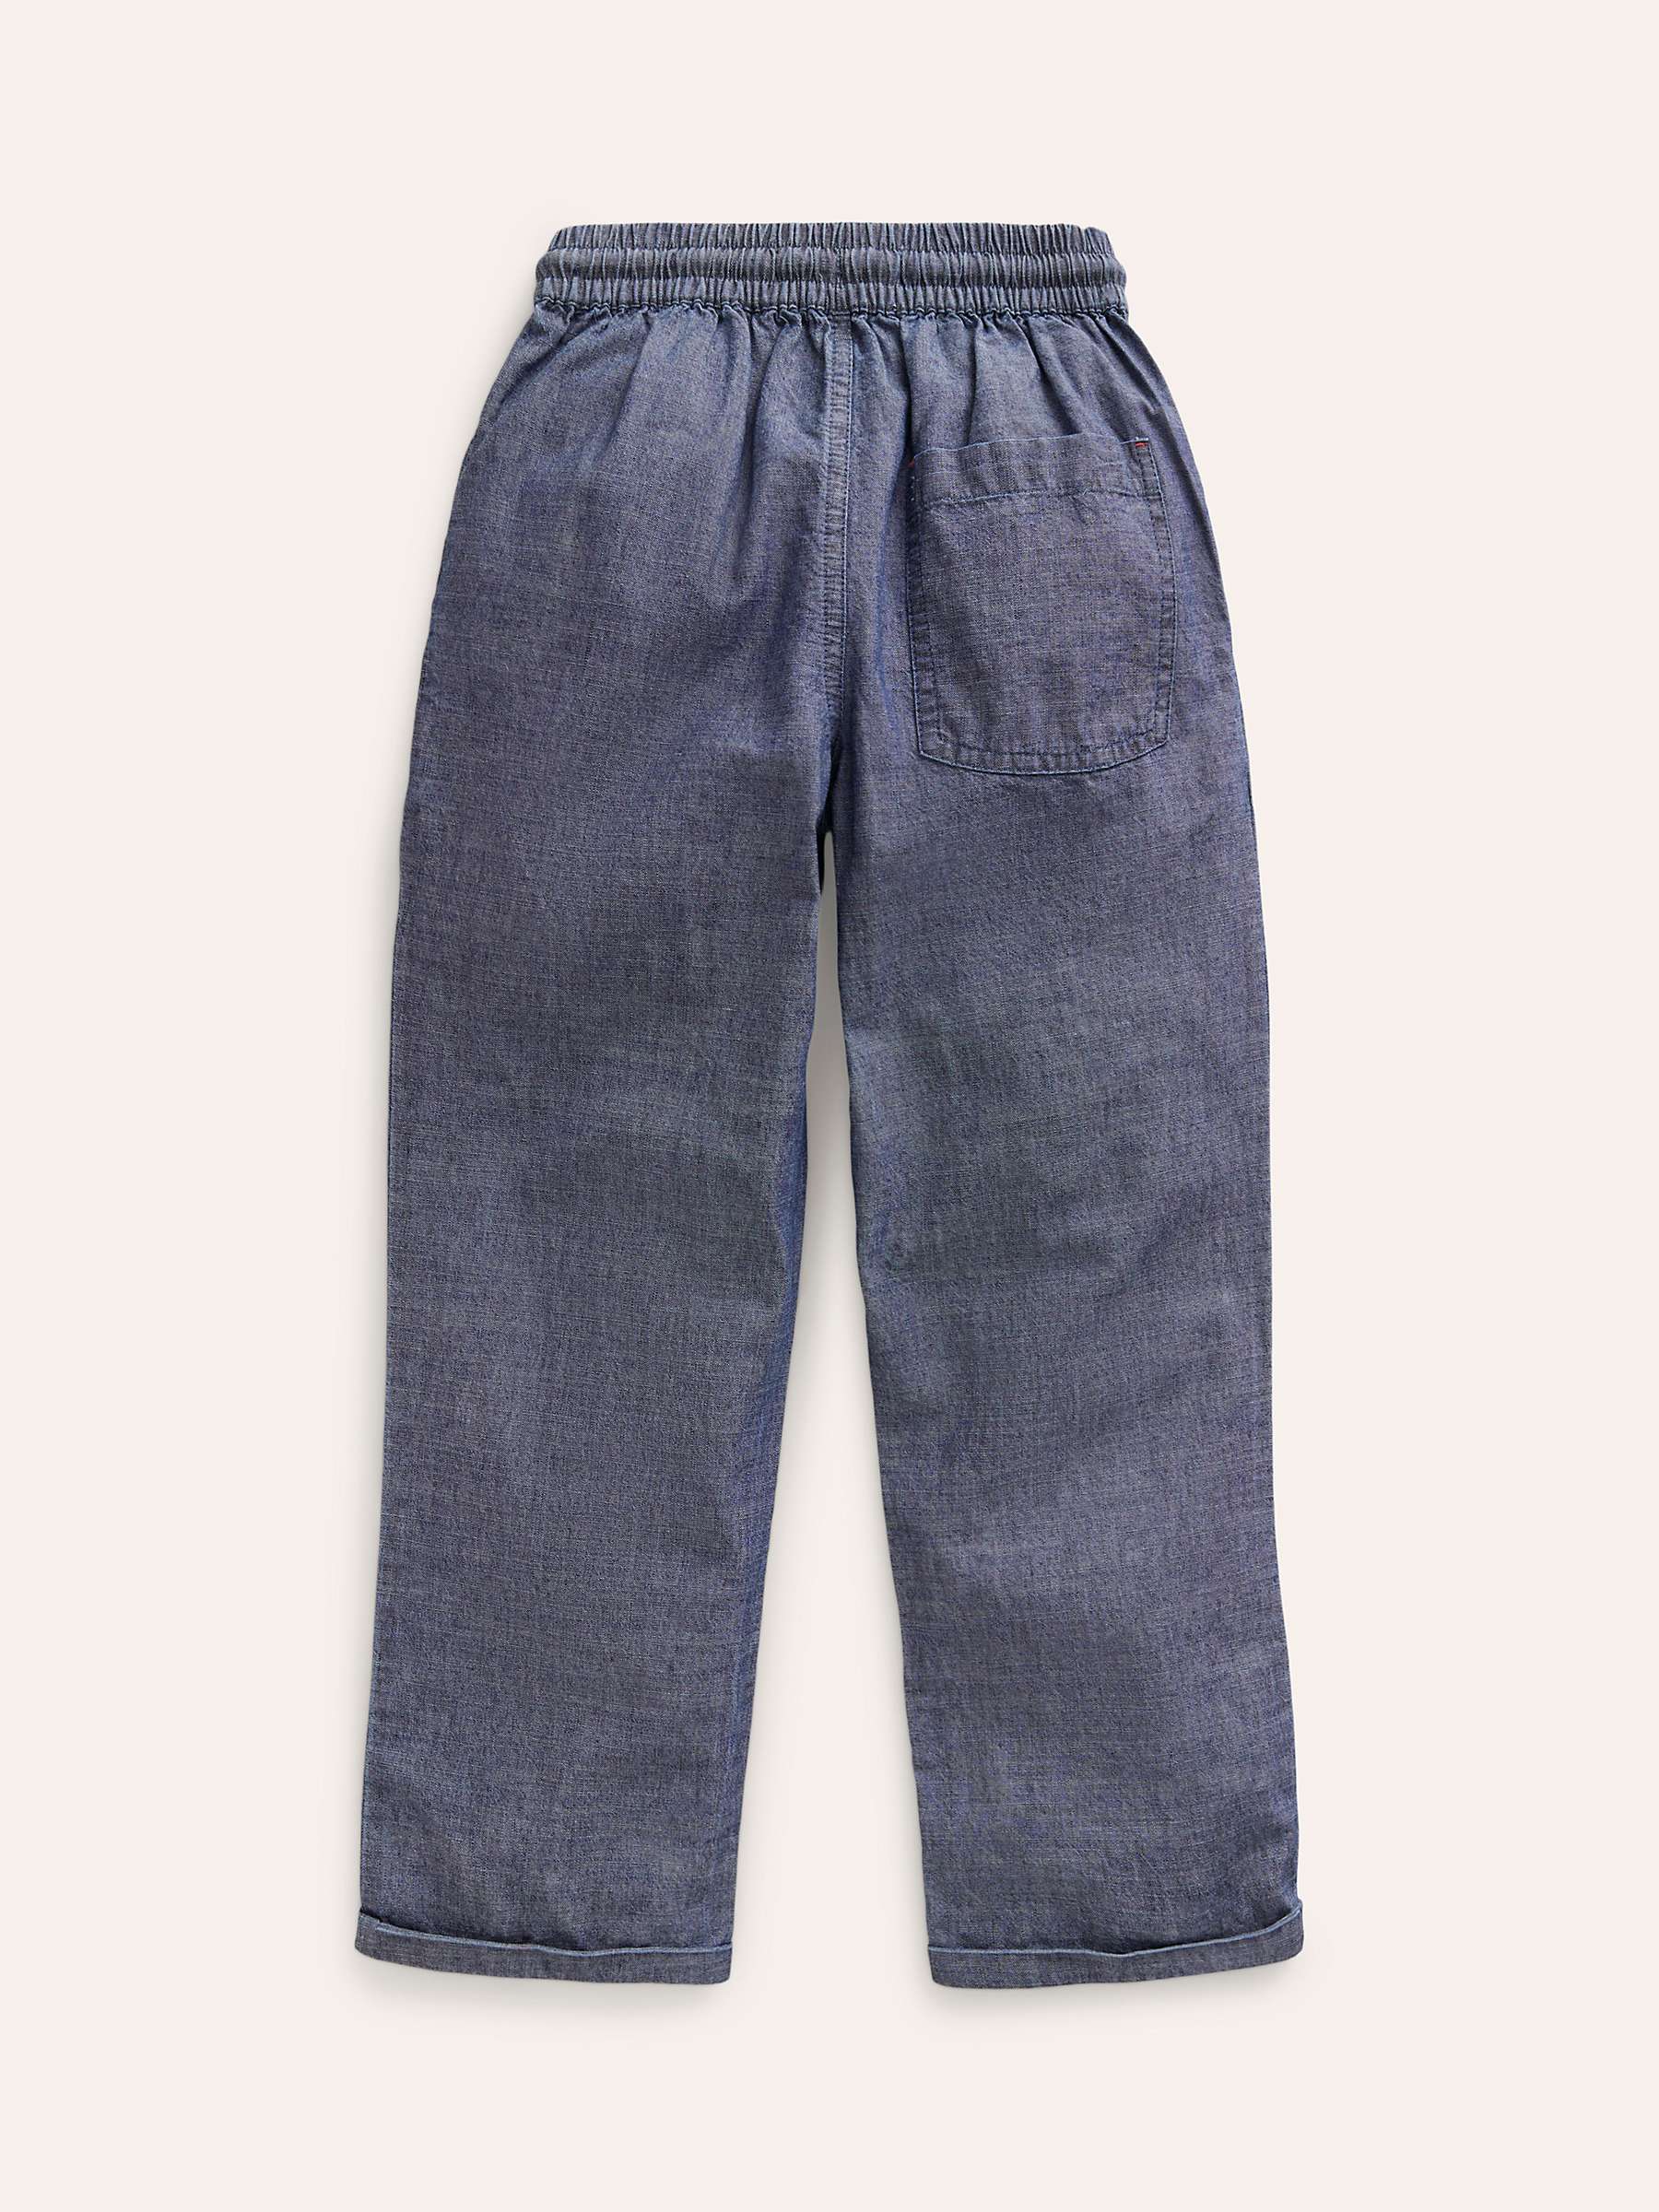 Buy Mini Boden Kids' Summer Pull On Trousers, Mid Chambray Online at johnlewis.com